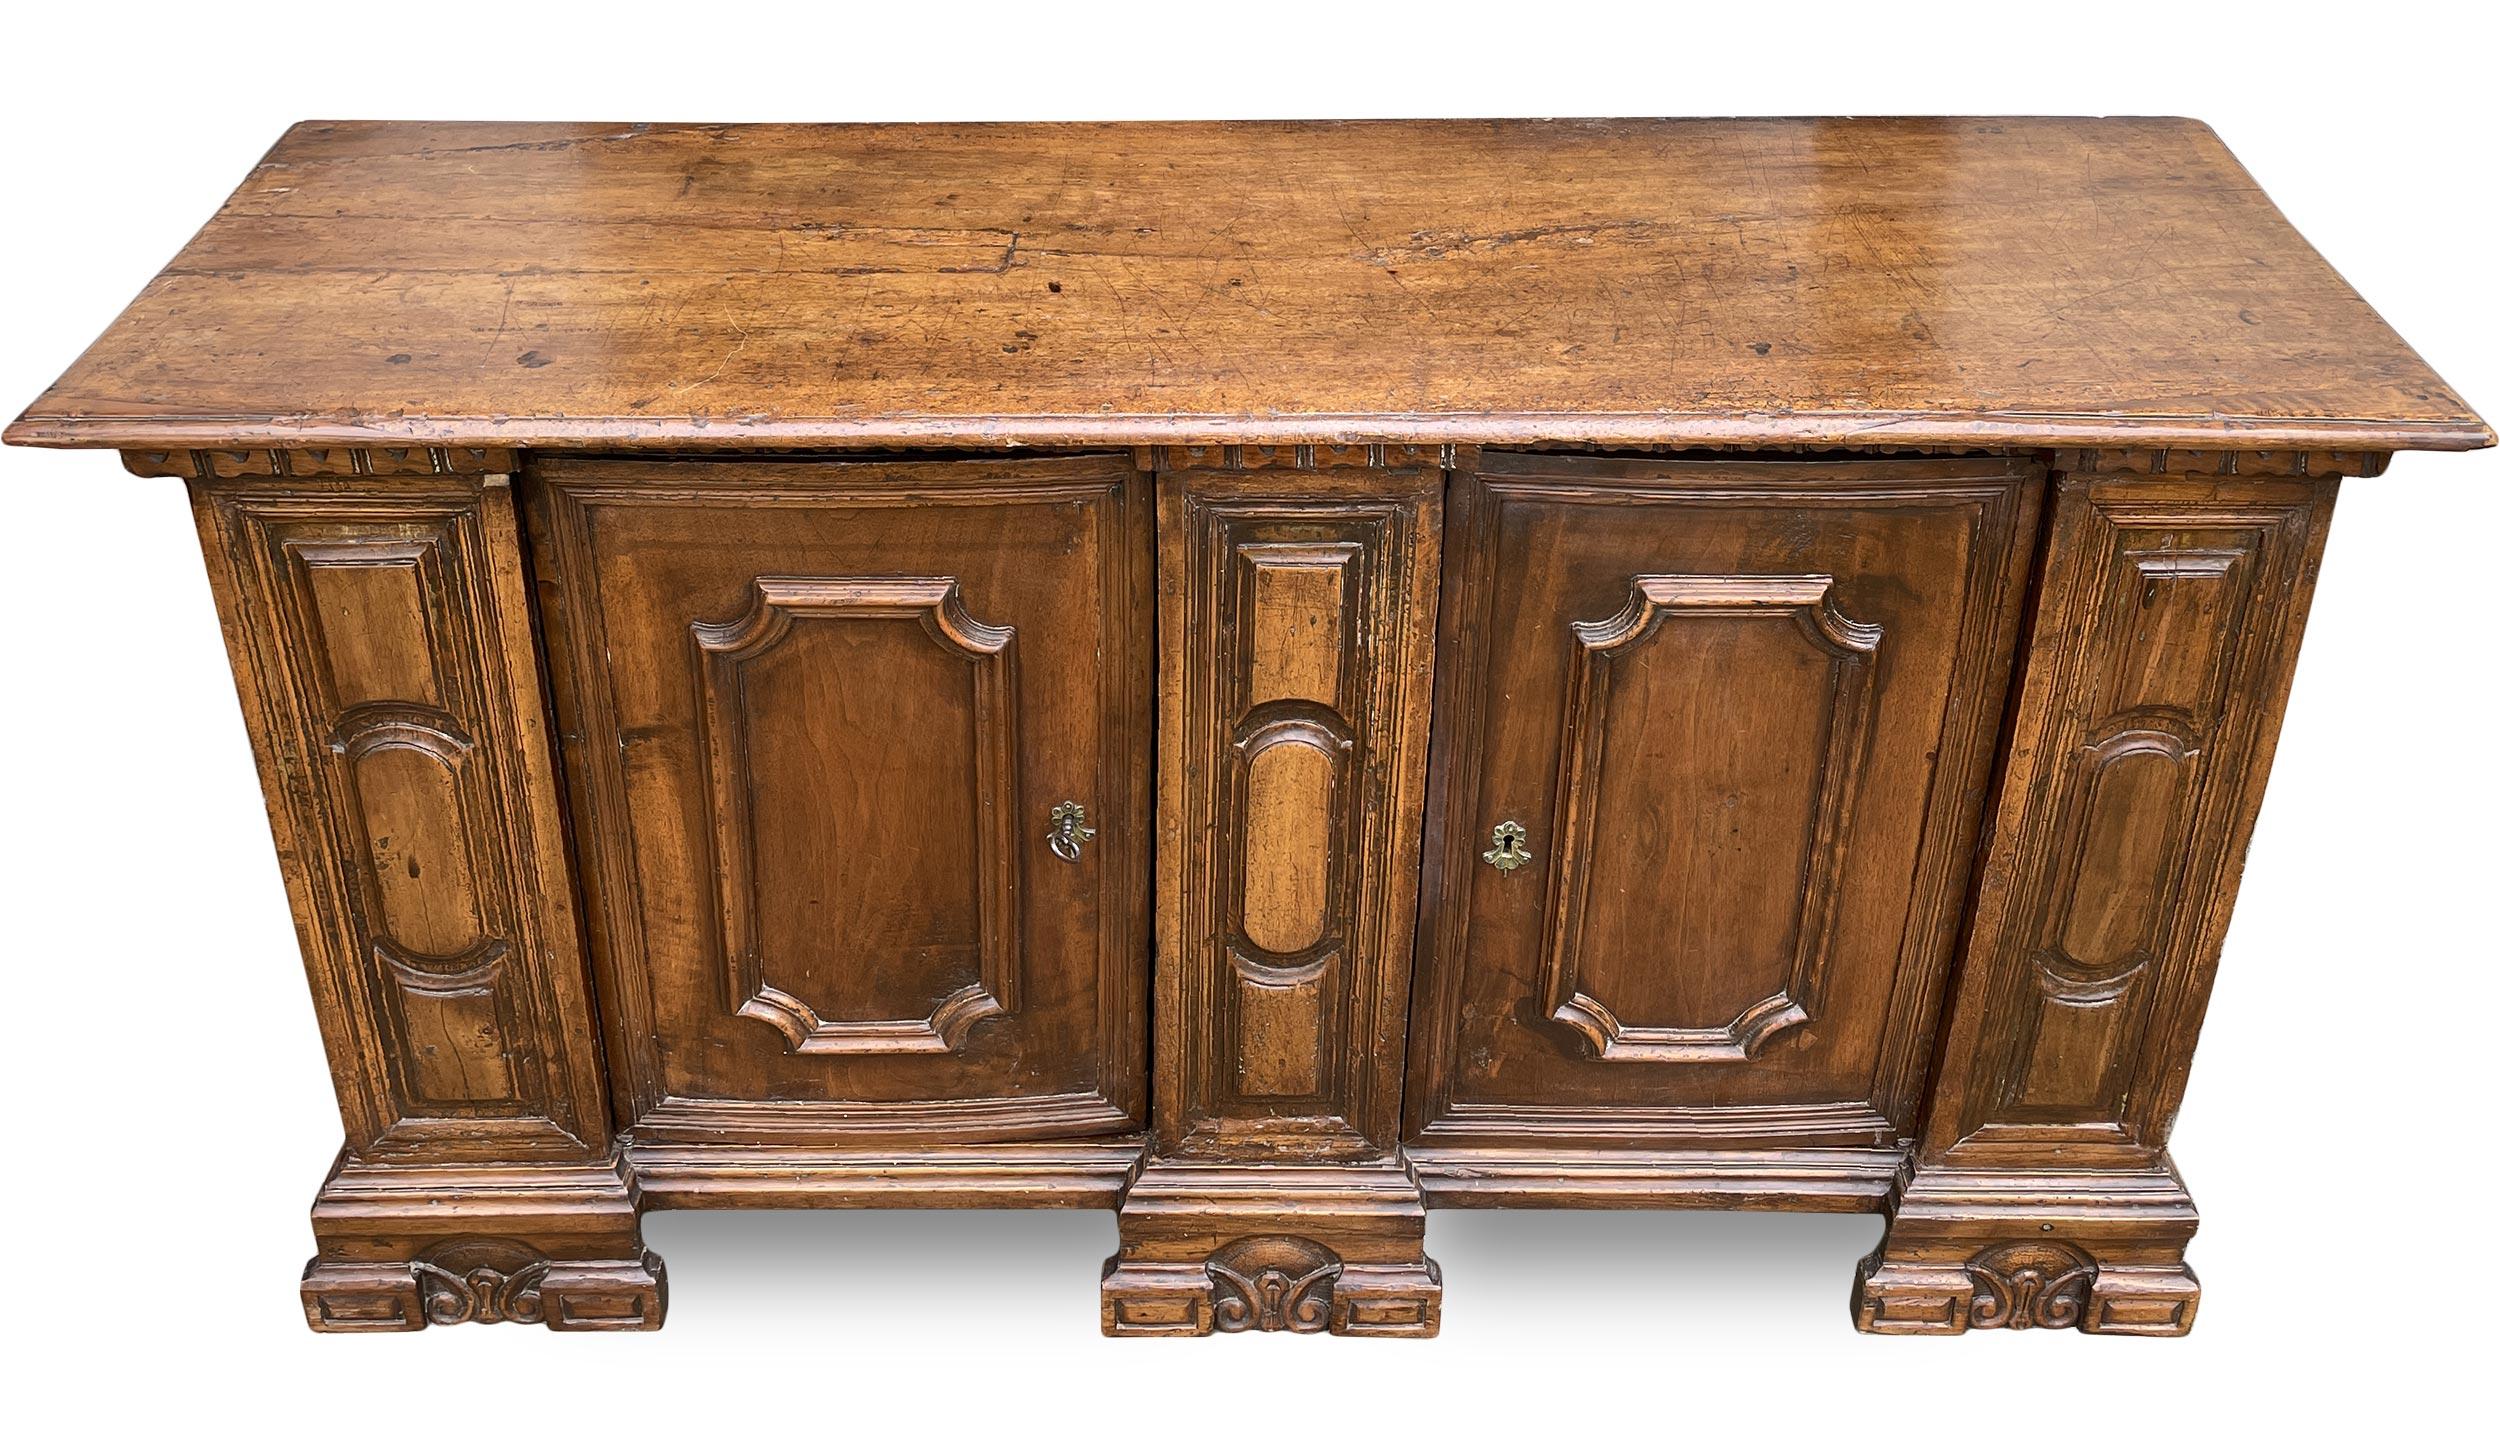 Louis XIII Credenzas - 1 For Sale at 1stDibs